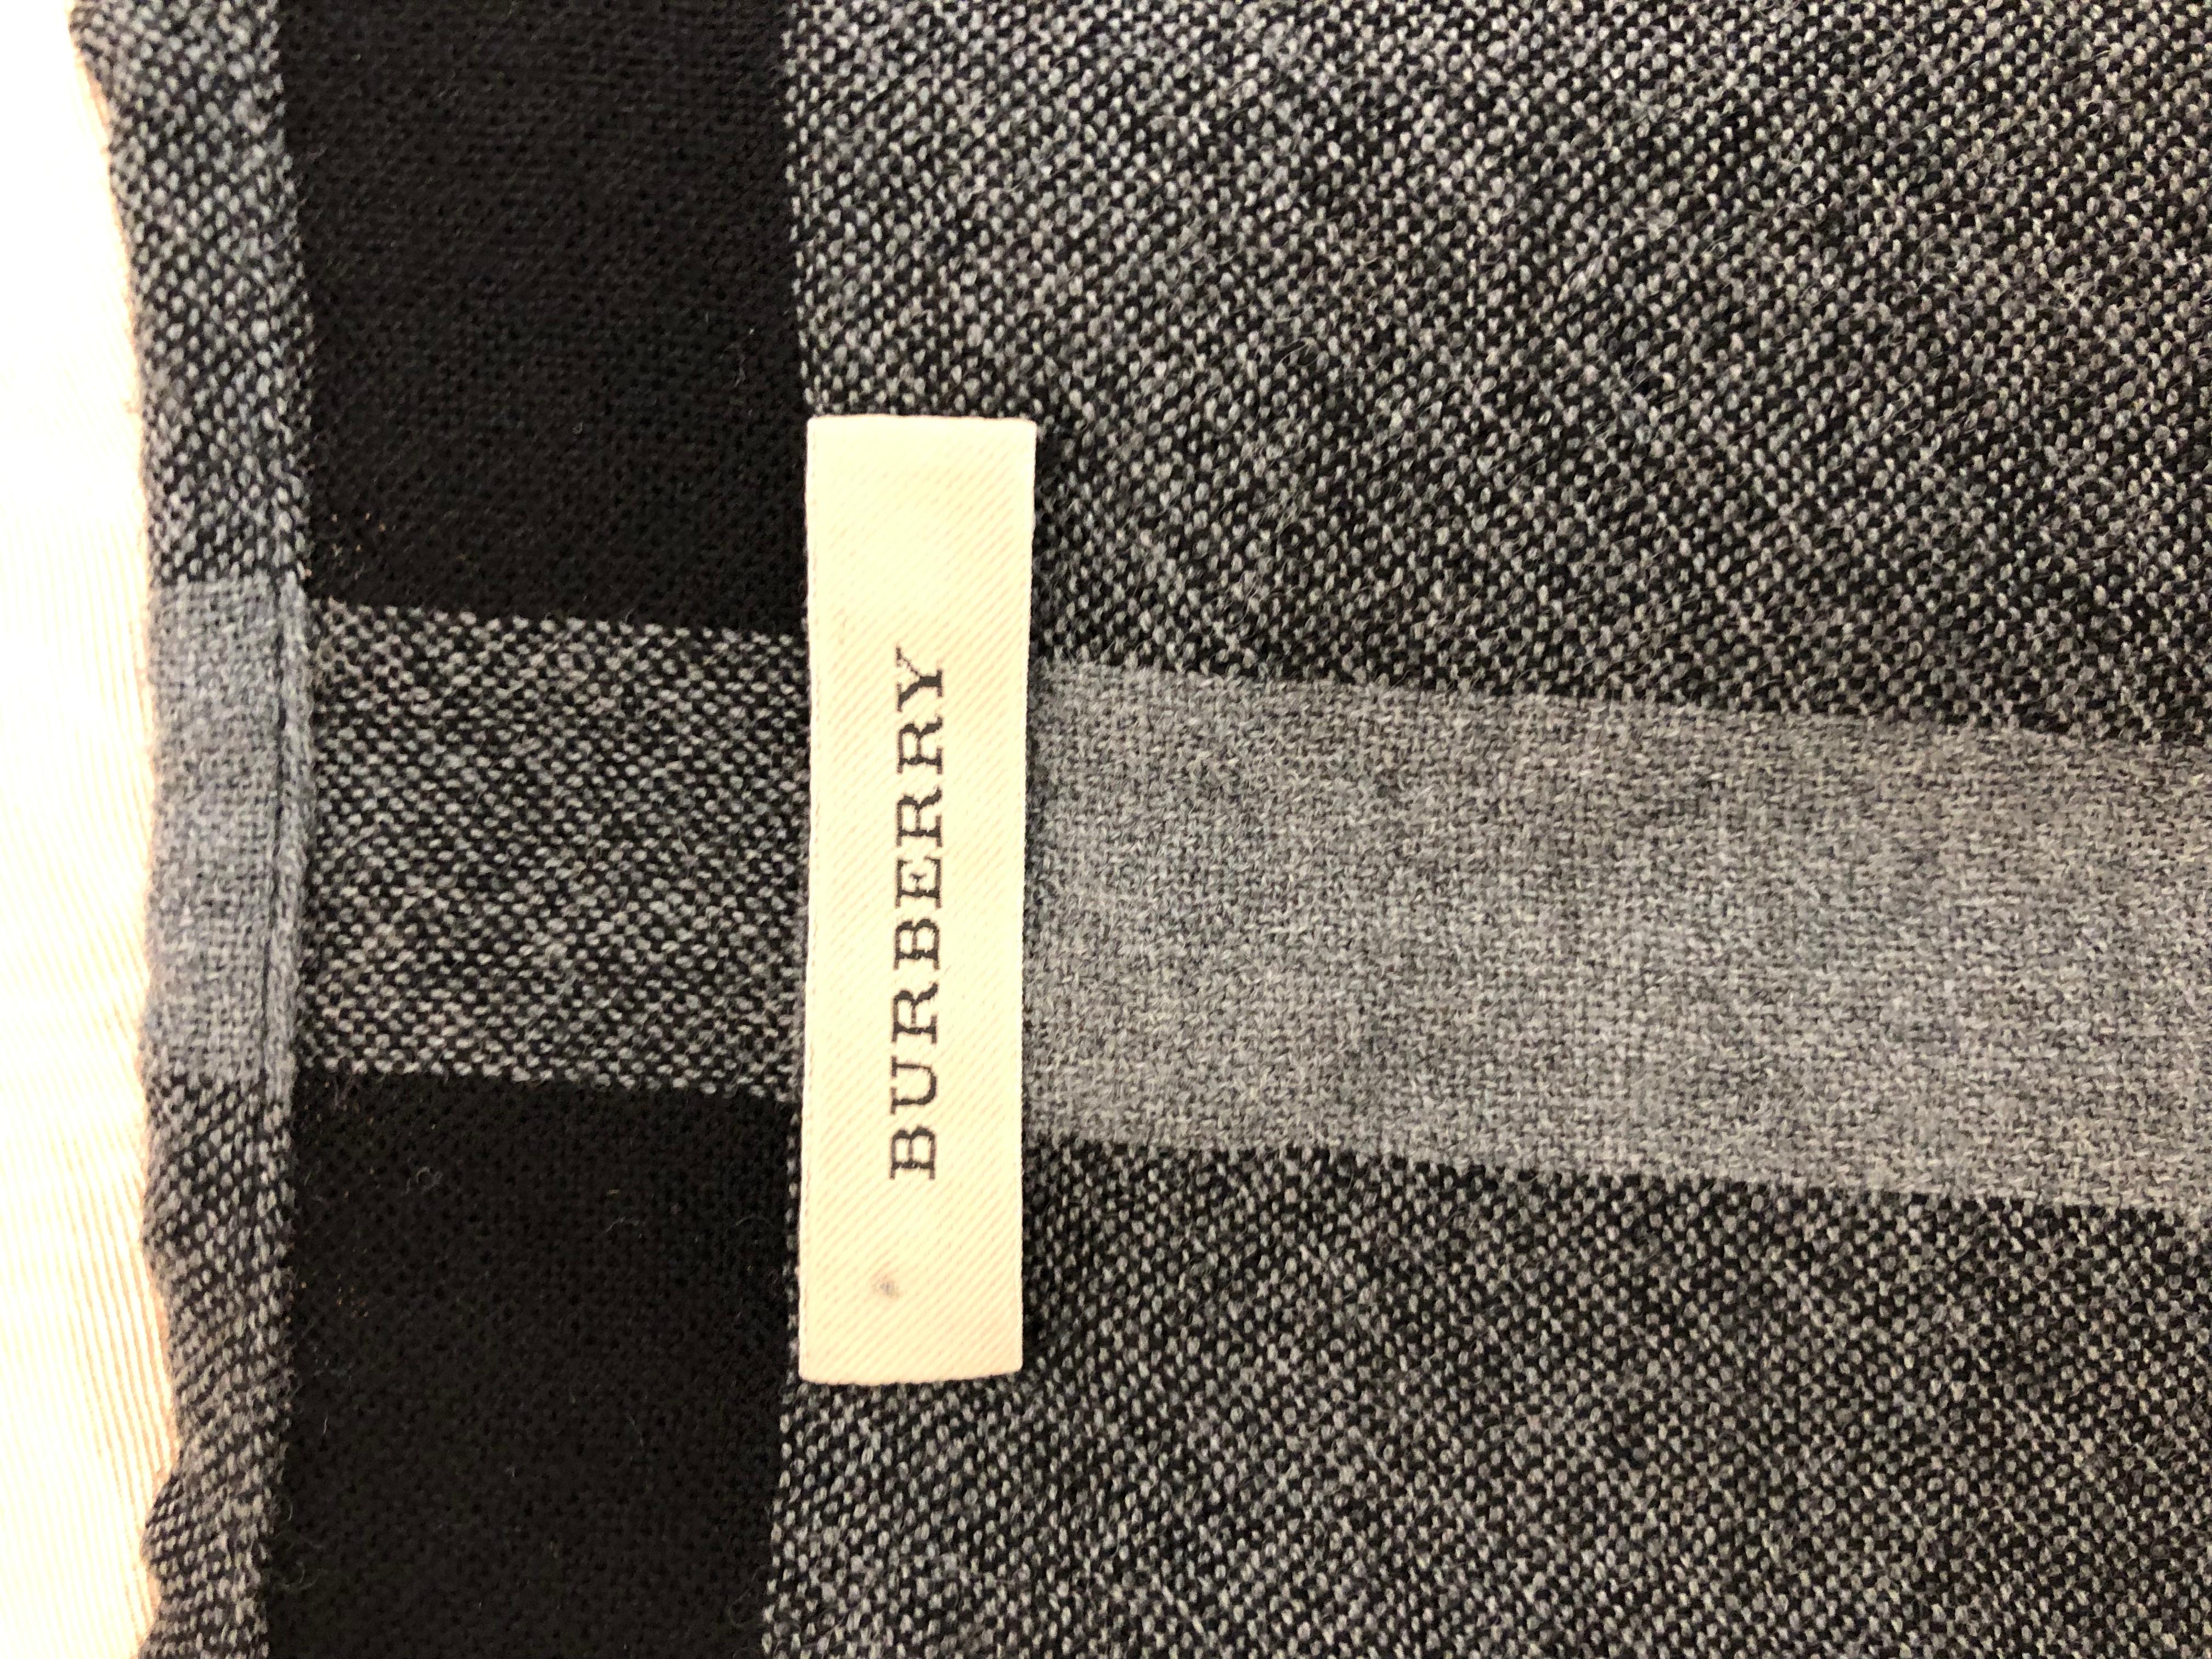 This Burberry fine wool merino grey and black shawl/cape with a fringe trim, is in excellent condition. Made in Scotland.